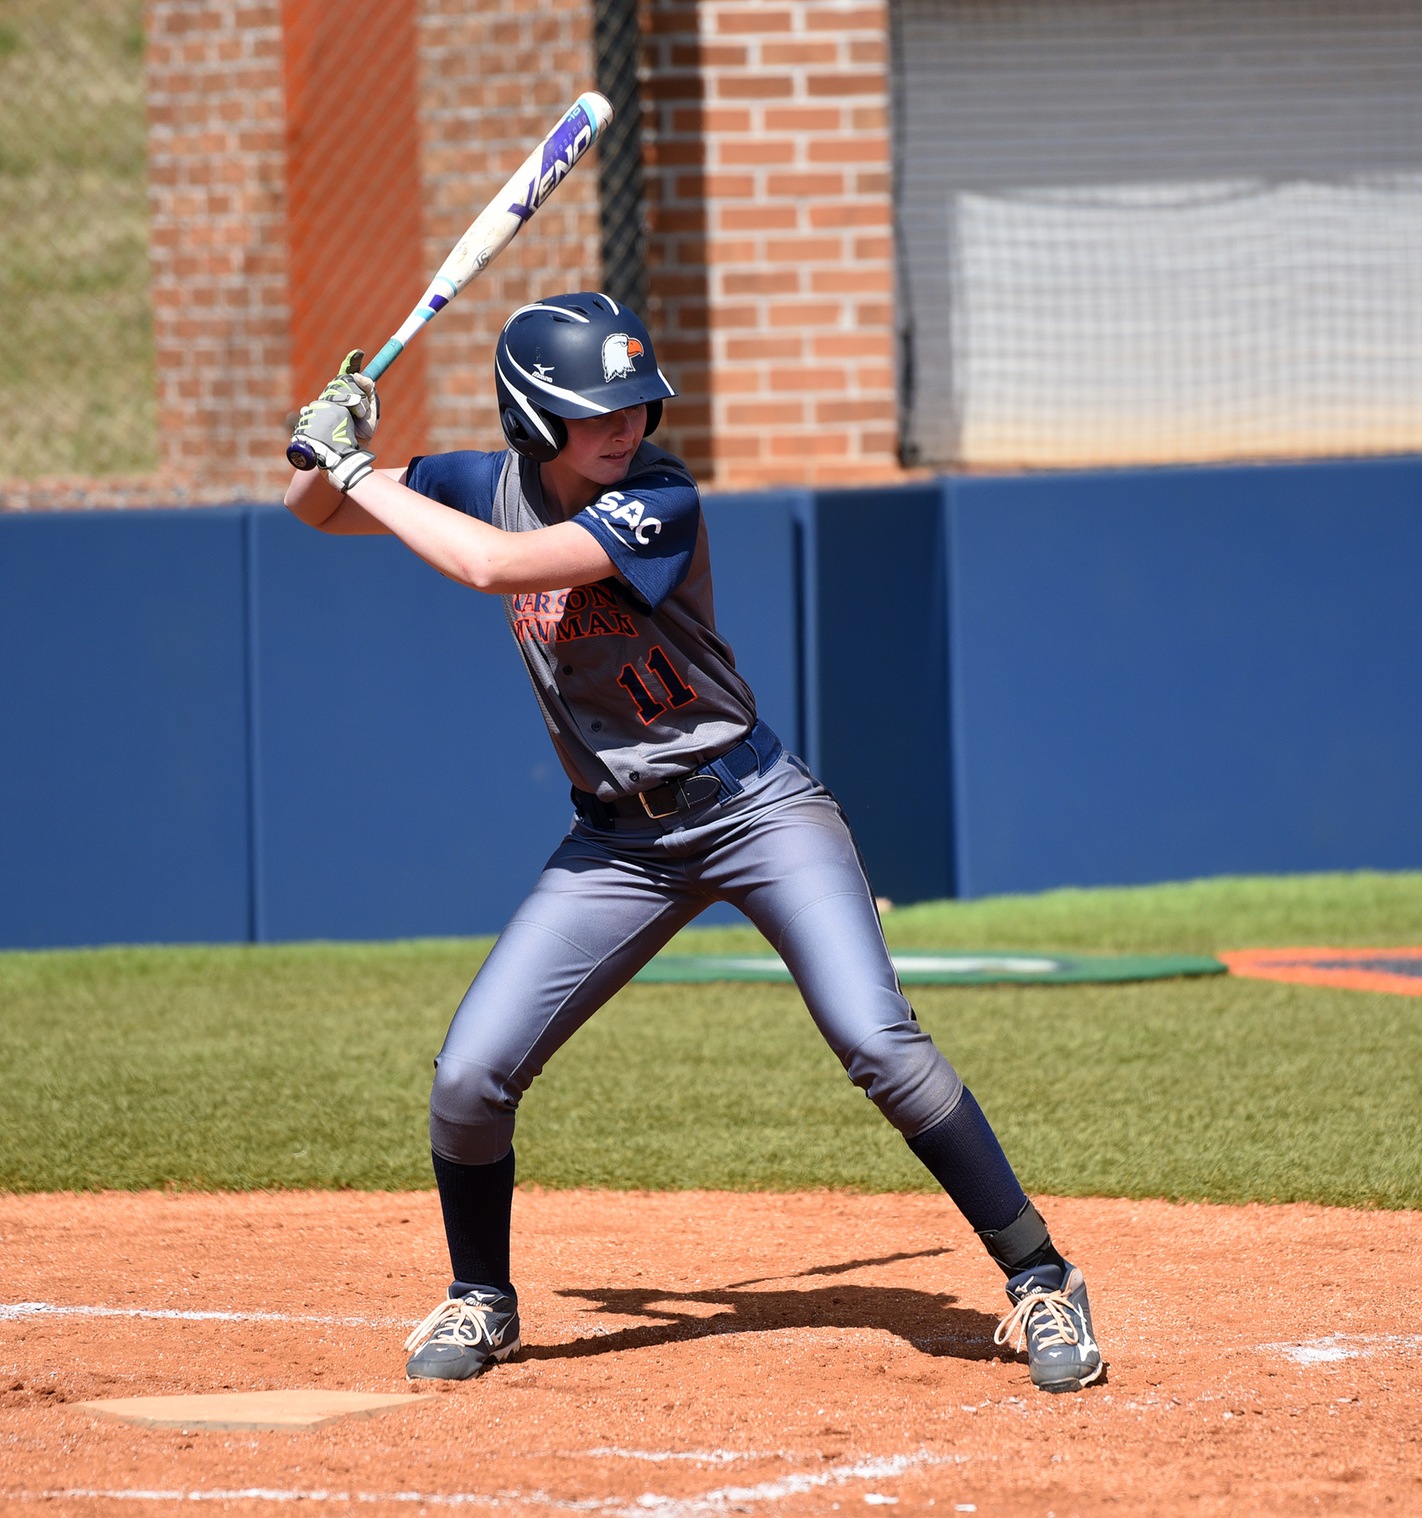 C-N tallies first sweep at Mars Hill since ’06 with two 9-2 wins